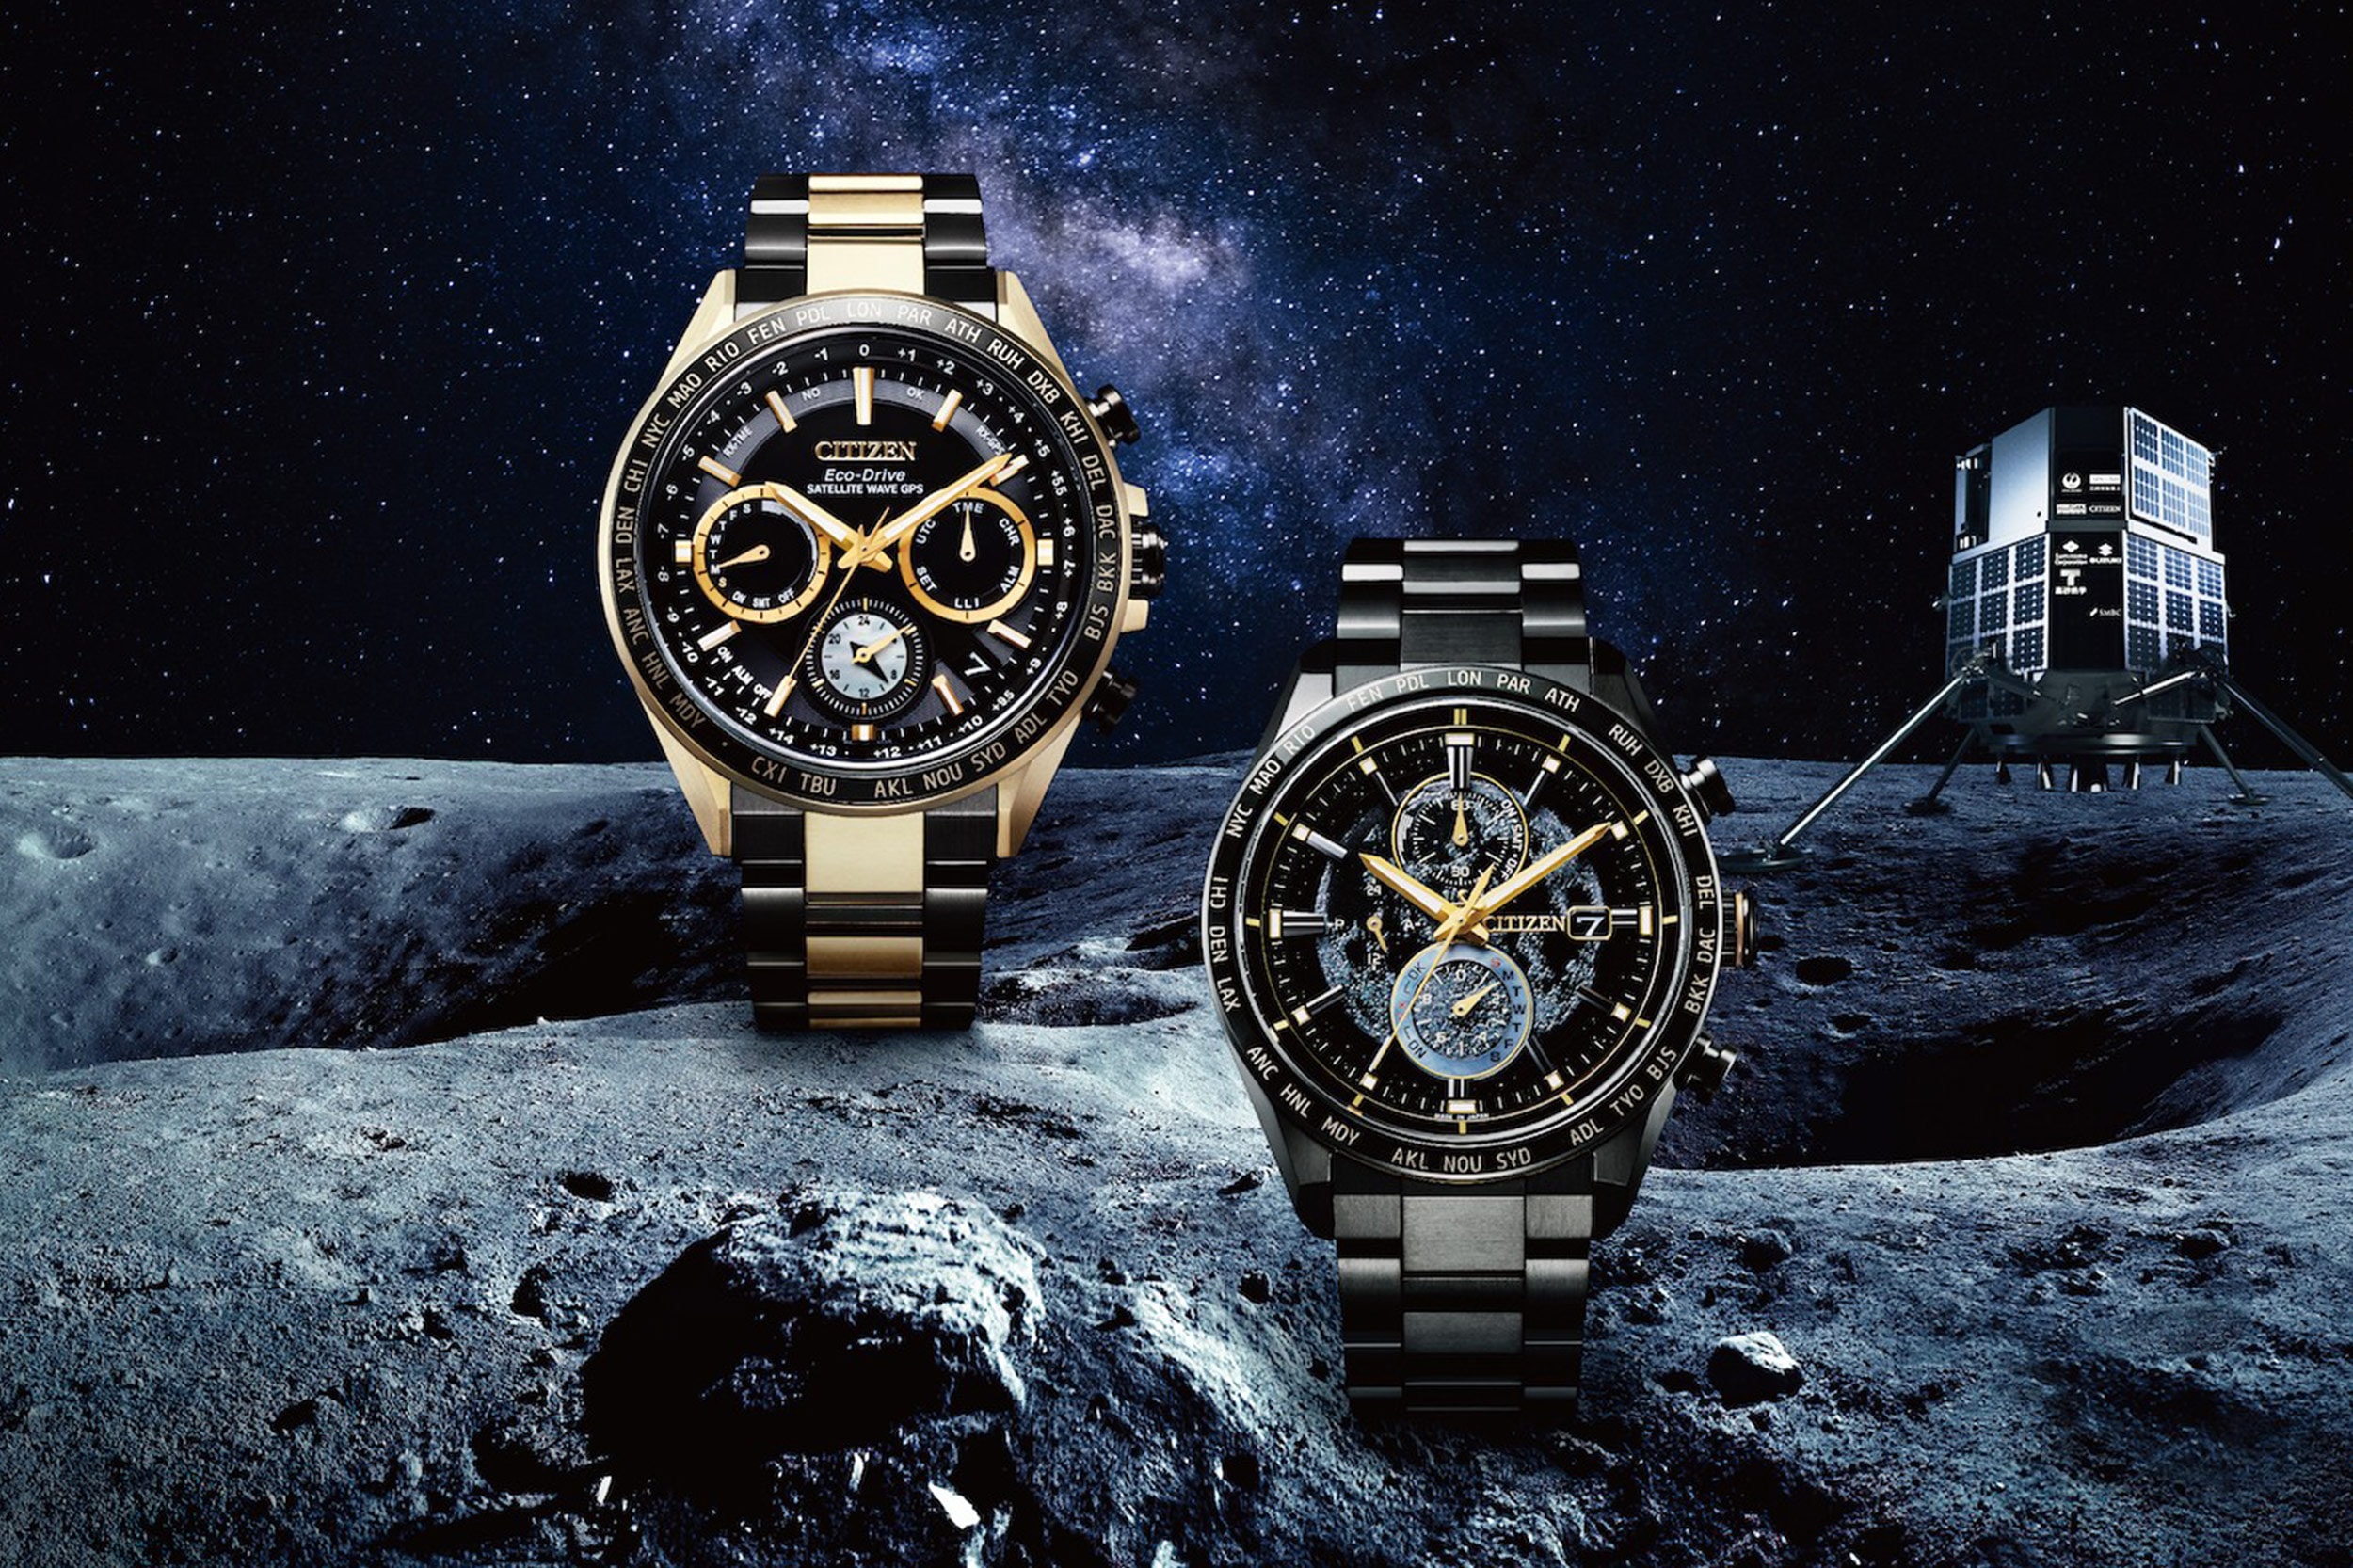 News - The Jacob & Co Astronomia Bucherer Blue That Went Into Space